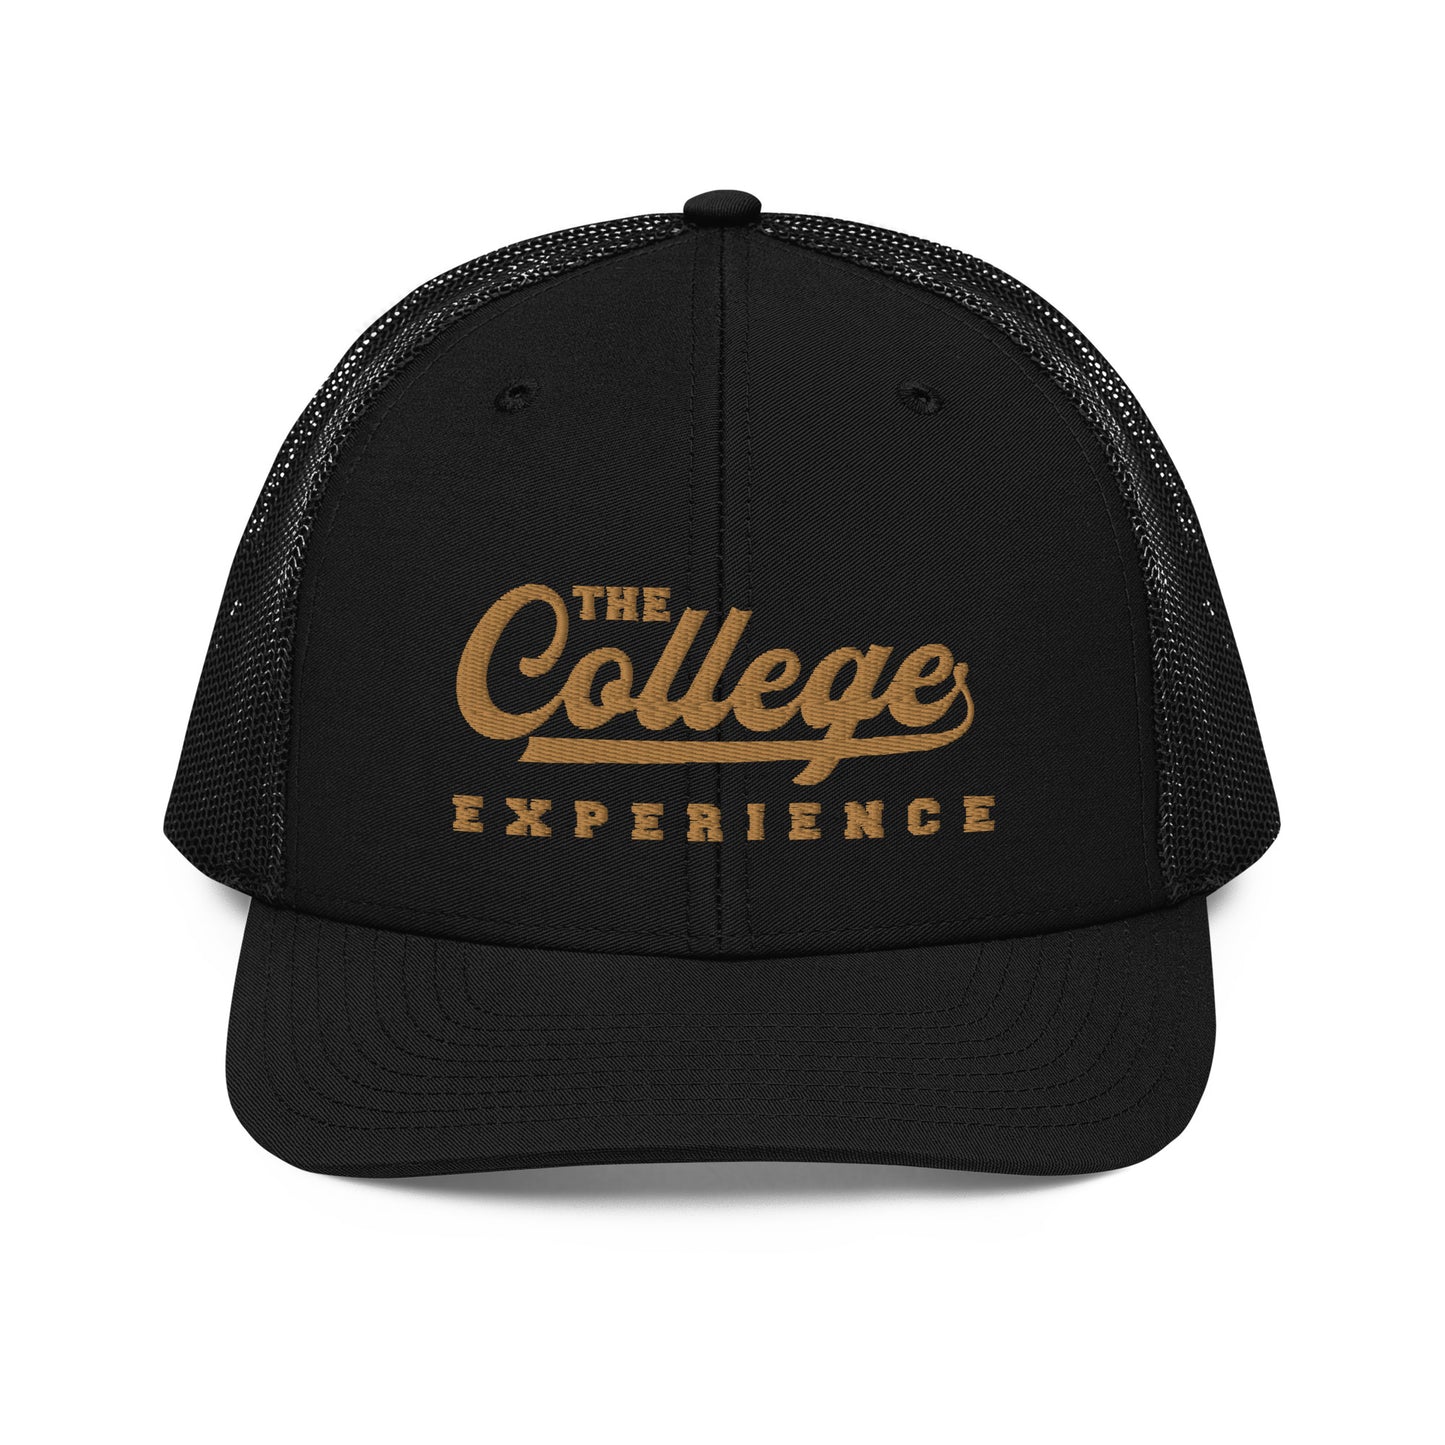 The College Experience - Trucker Cap (Gold Embroidery)